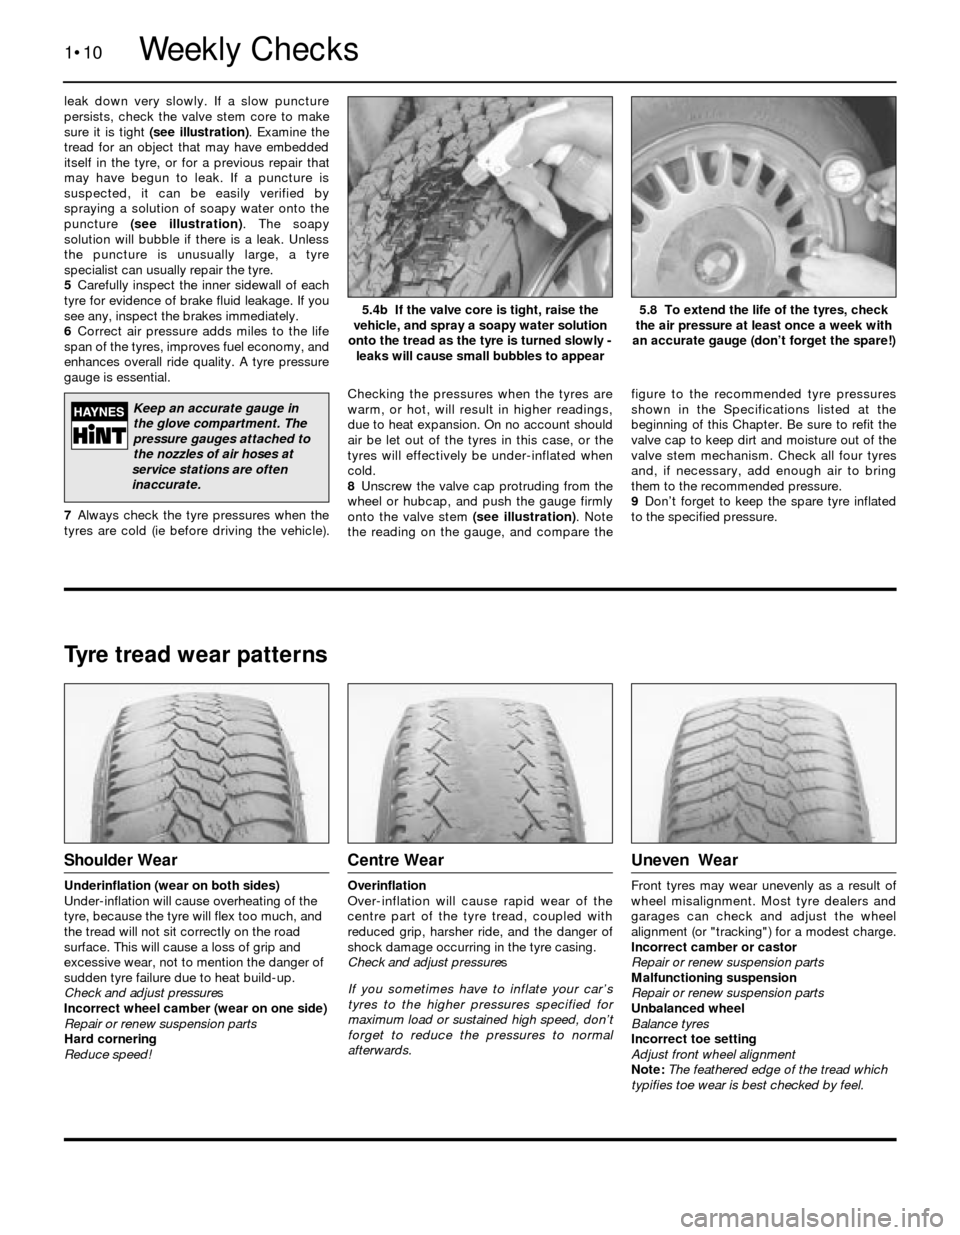 BMW 3 SERIES 1990 E30 Workshop Manual leak down very slowly. If a slow puncture
persists, check the valve stem core to make
sure it is tight (see illustration). Examine the
tread for an object that may have embedded
itself in the tyre, or